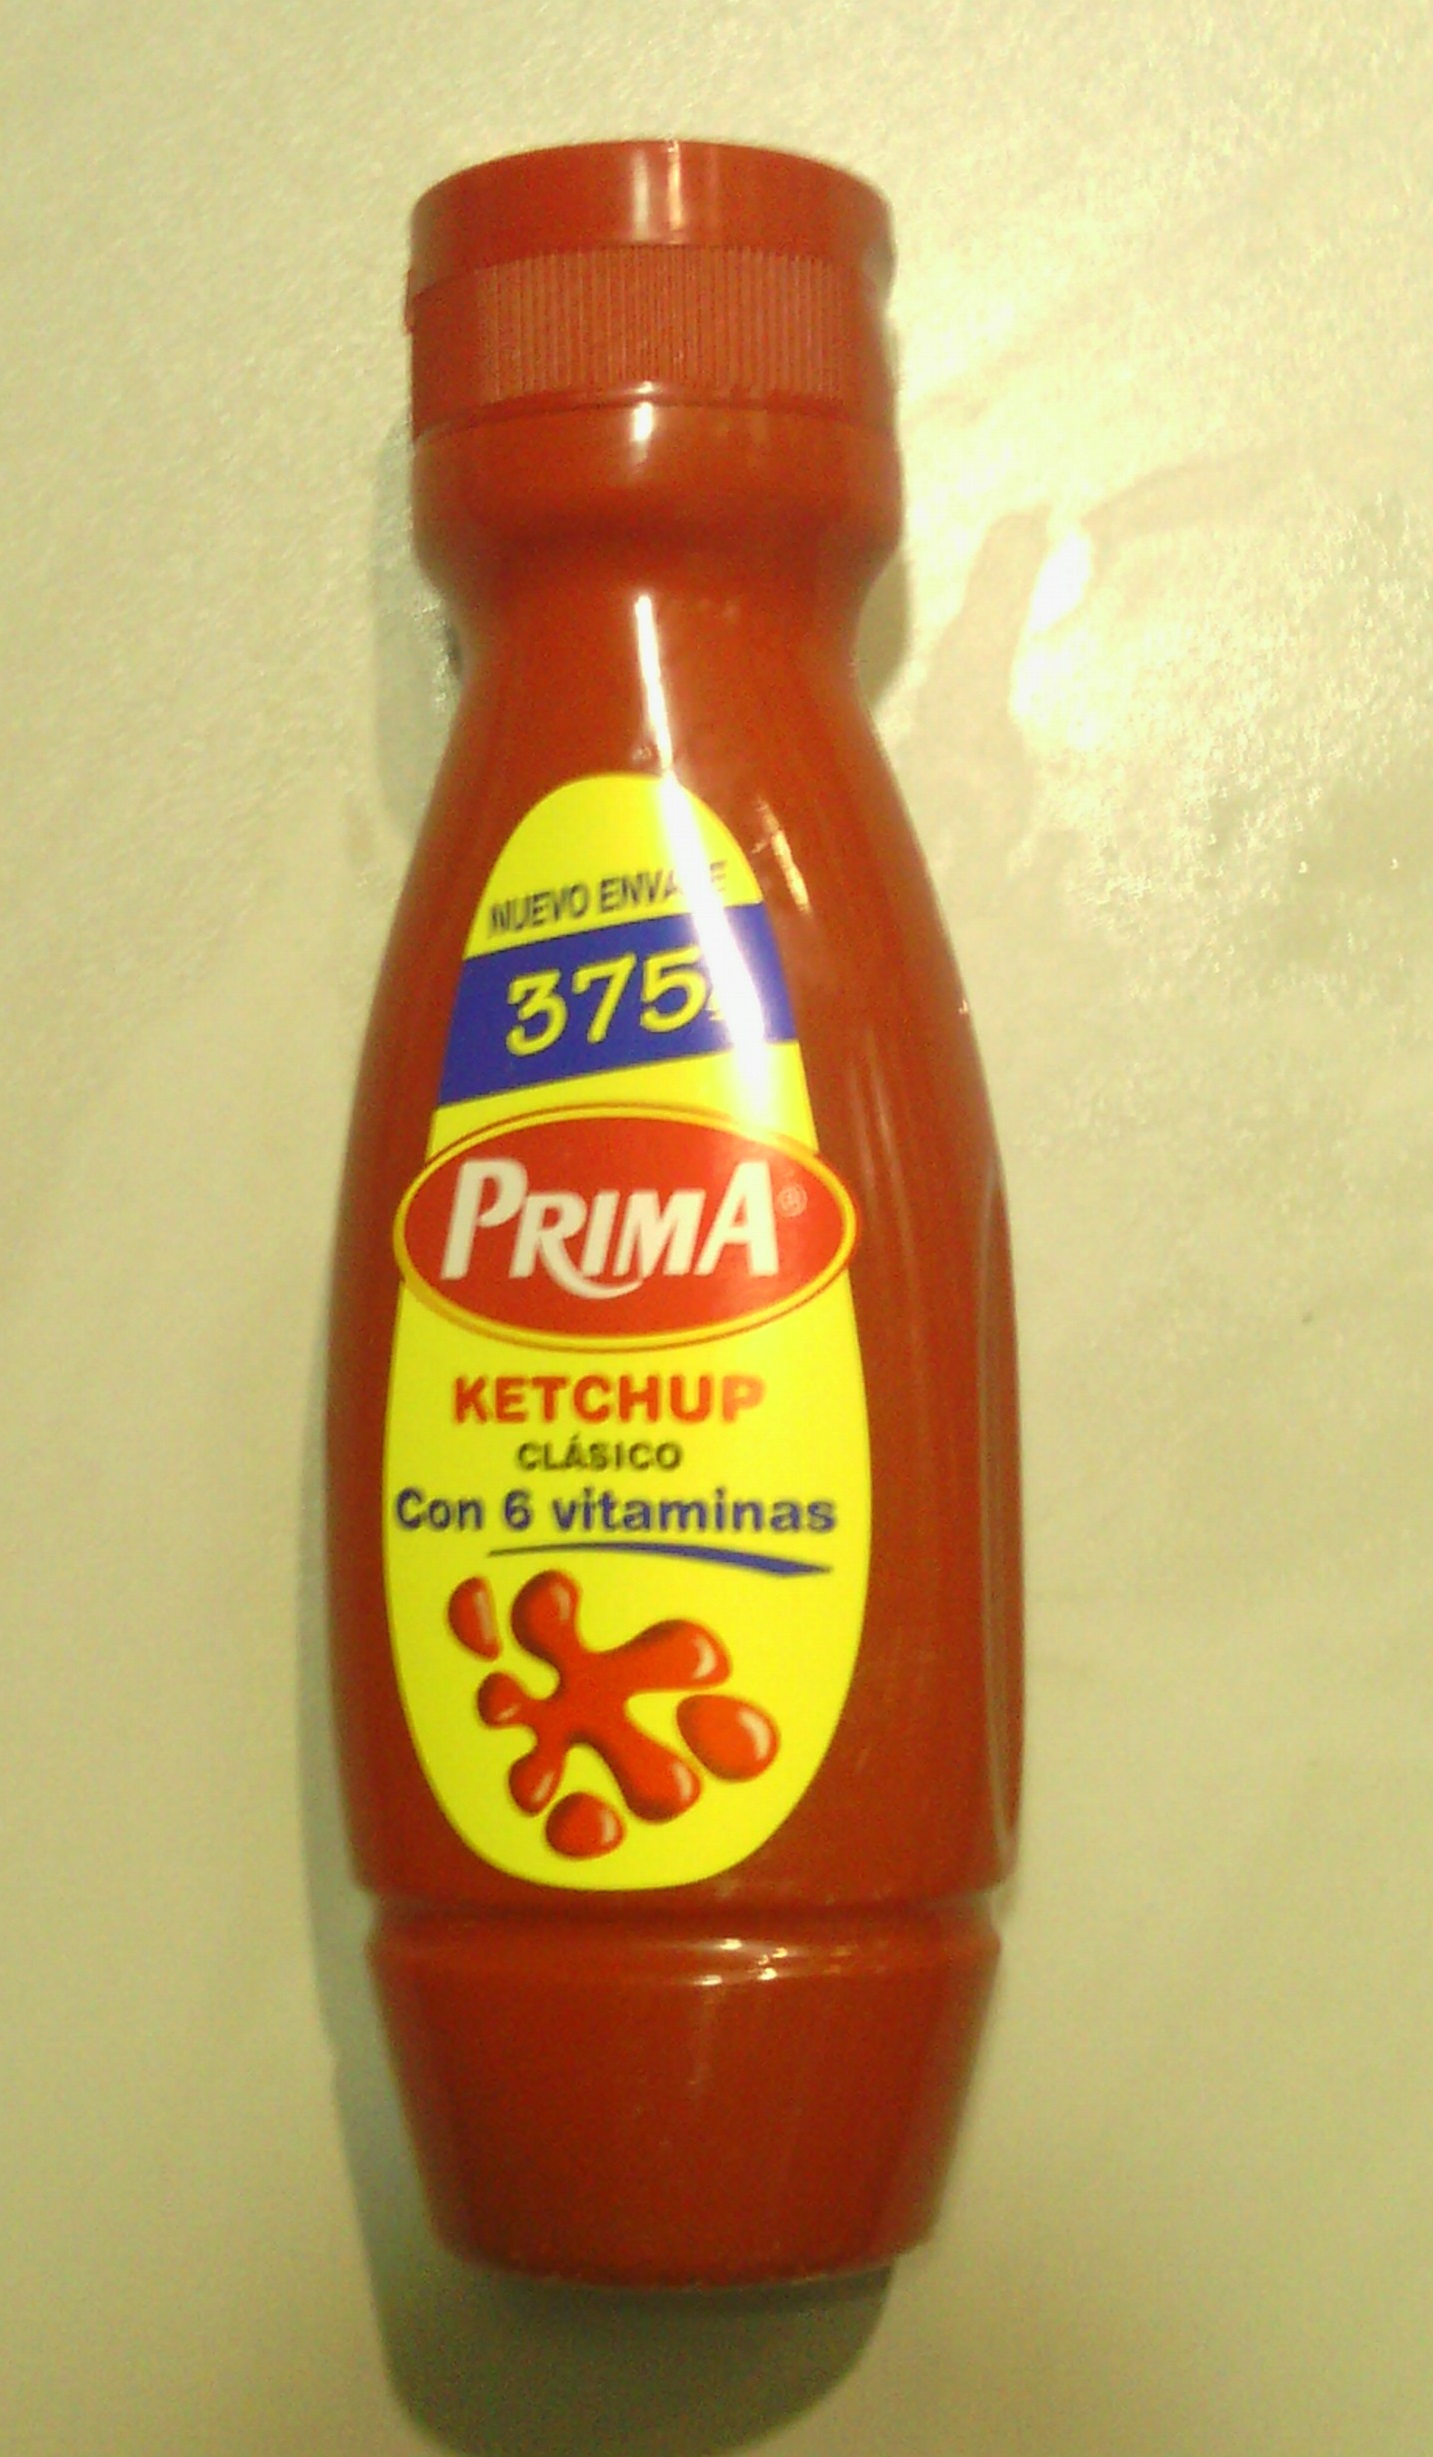 KETCHUP PRIMA CLASICO 325 GRS.